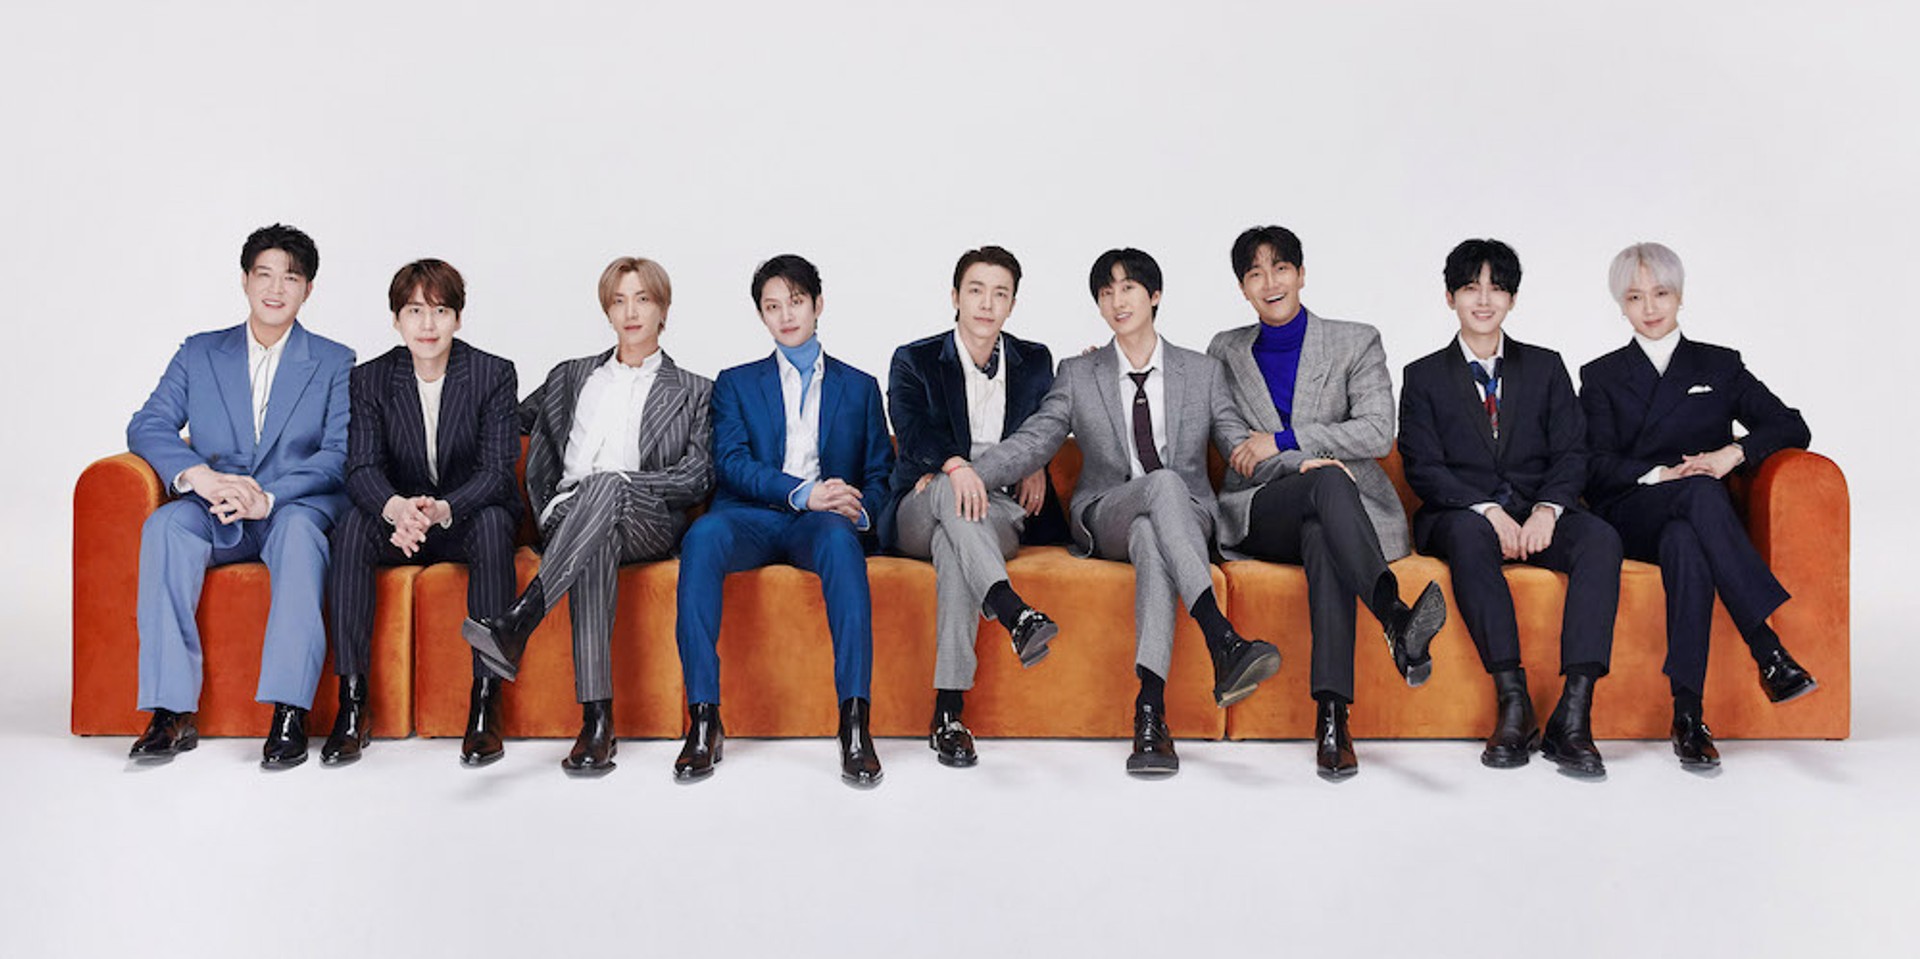 Super Junior drops music video for new song 'The Melody' to celebrate their 15th Anniversary - watch